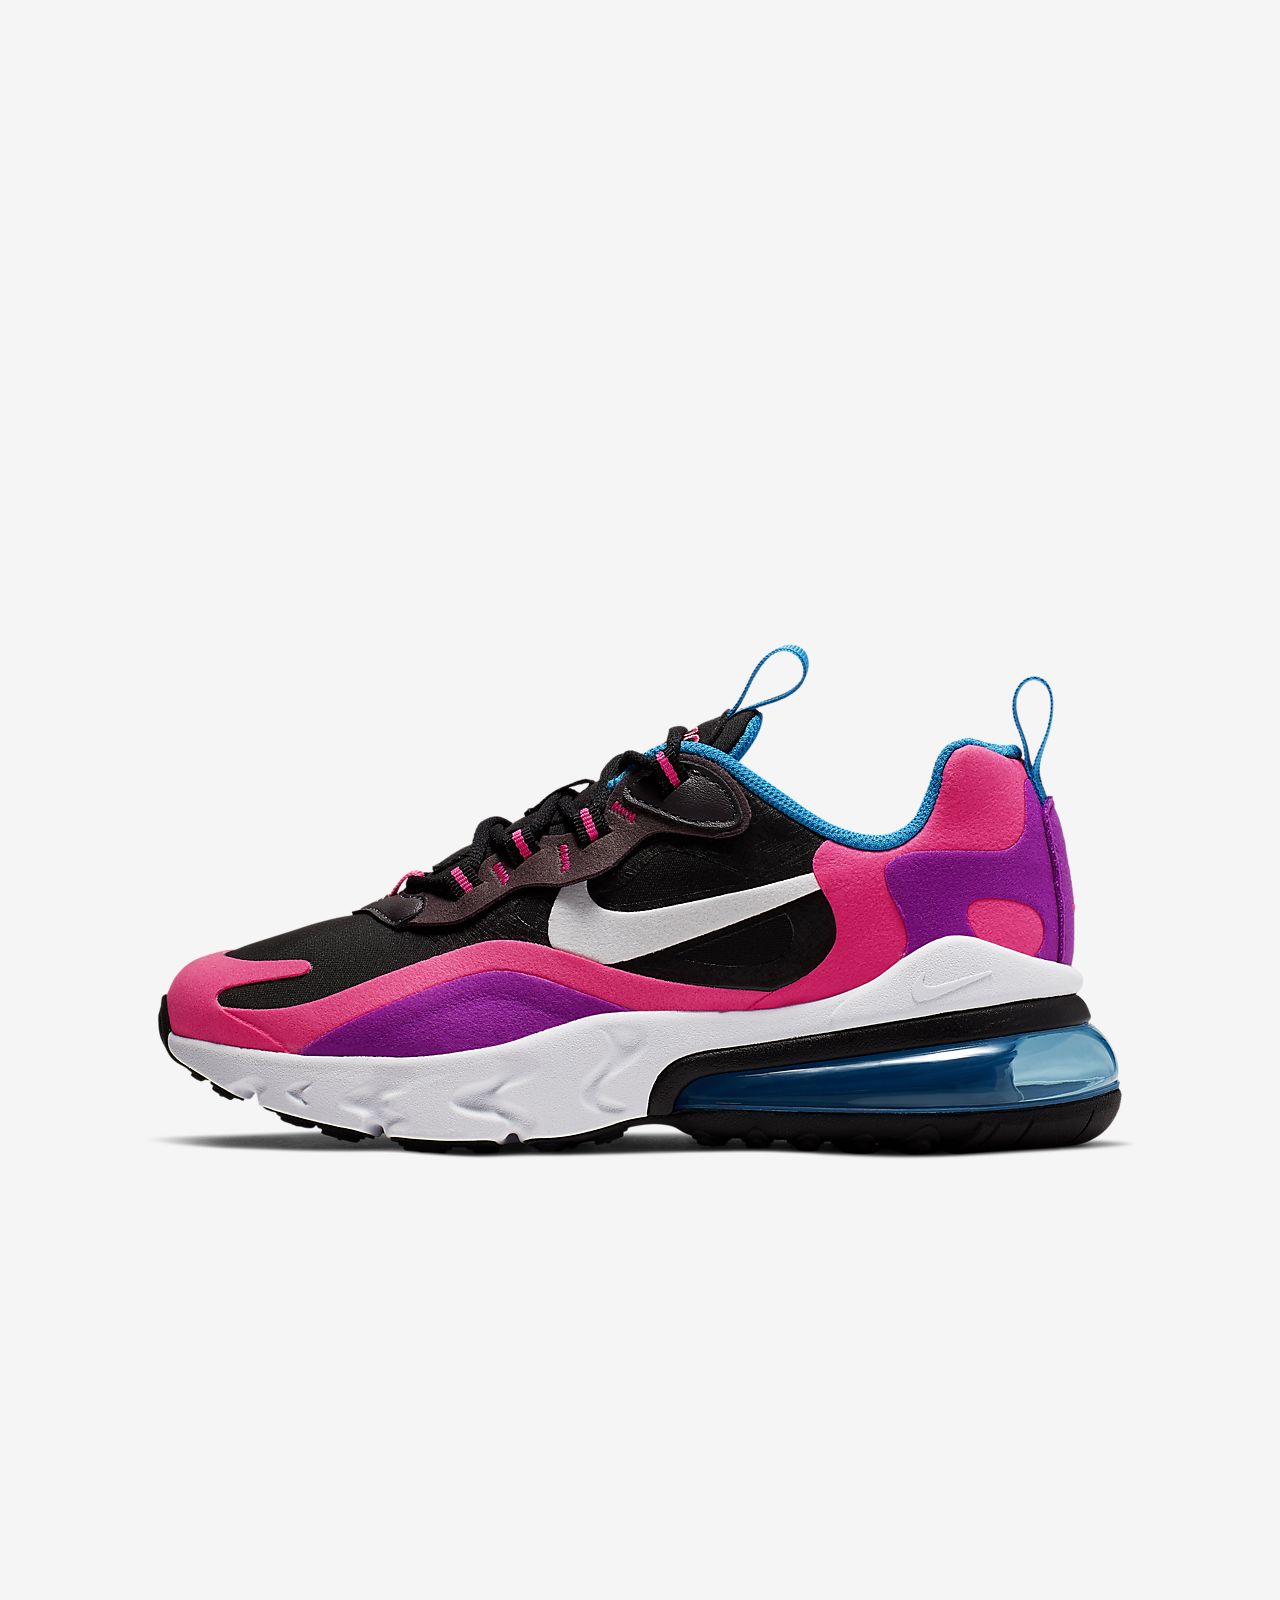 can air max 270 go in the washing machine